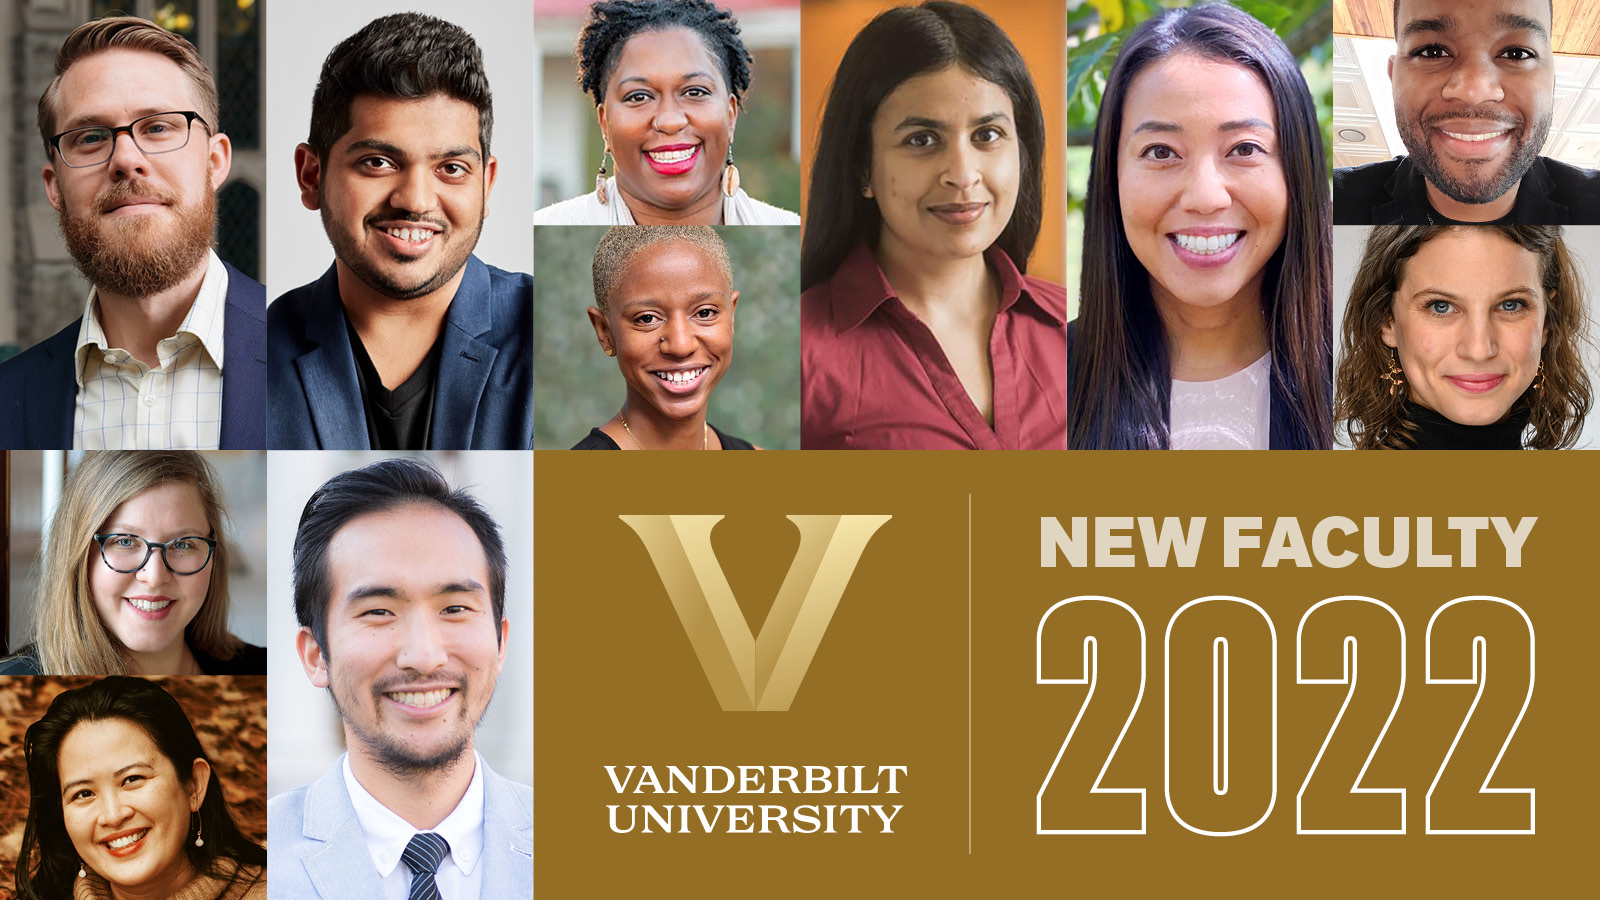 NEW FACULTY: Vanderbilt’s newest faculty share what sparks their academic mission